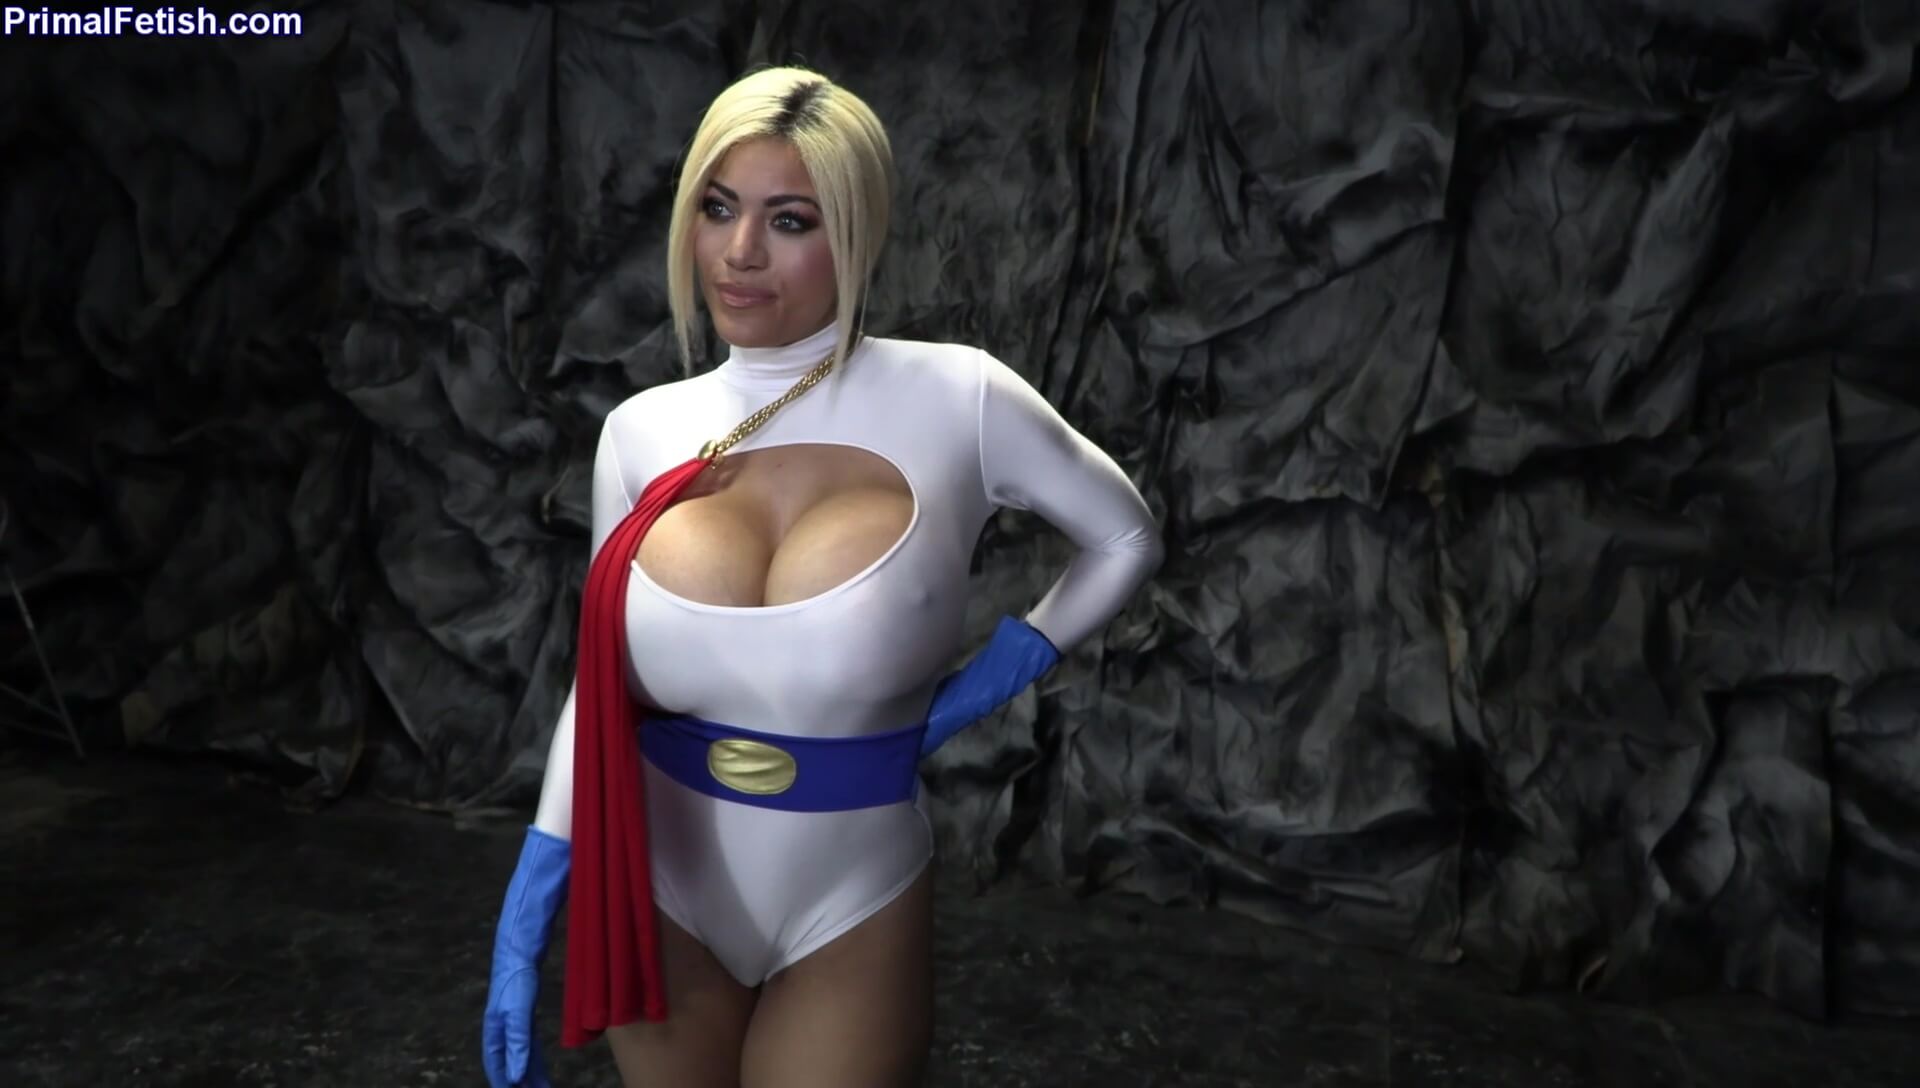 andrew flint recommends power girl porn parody pic